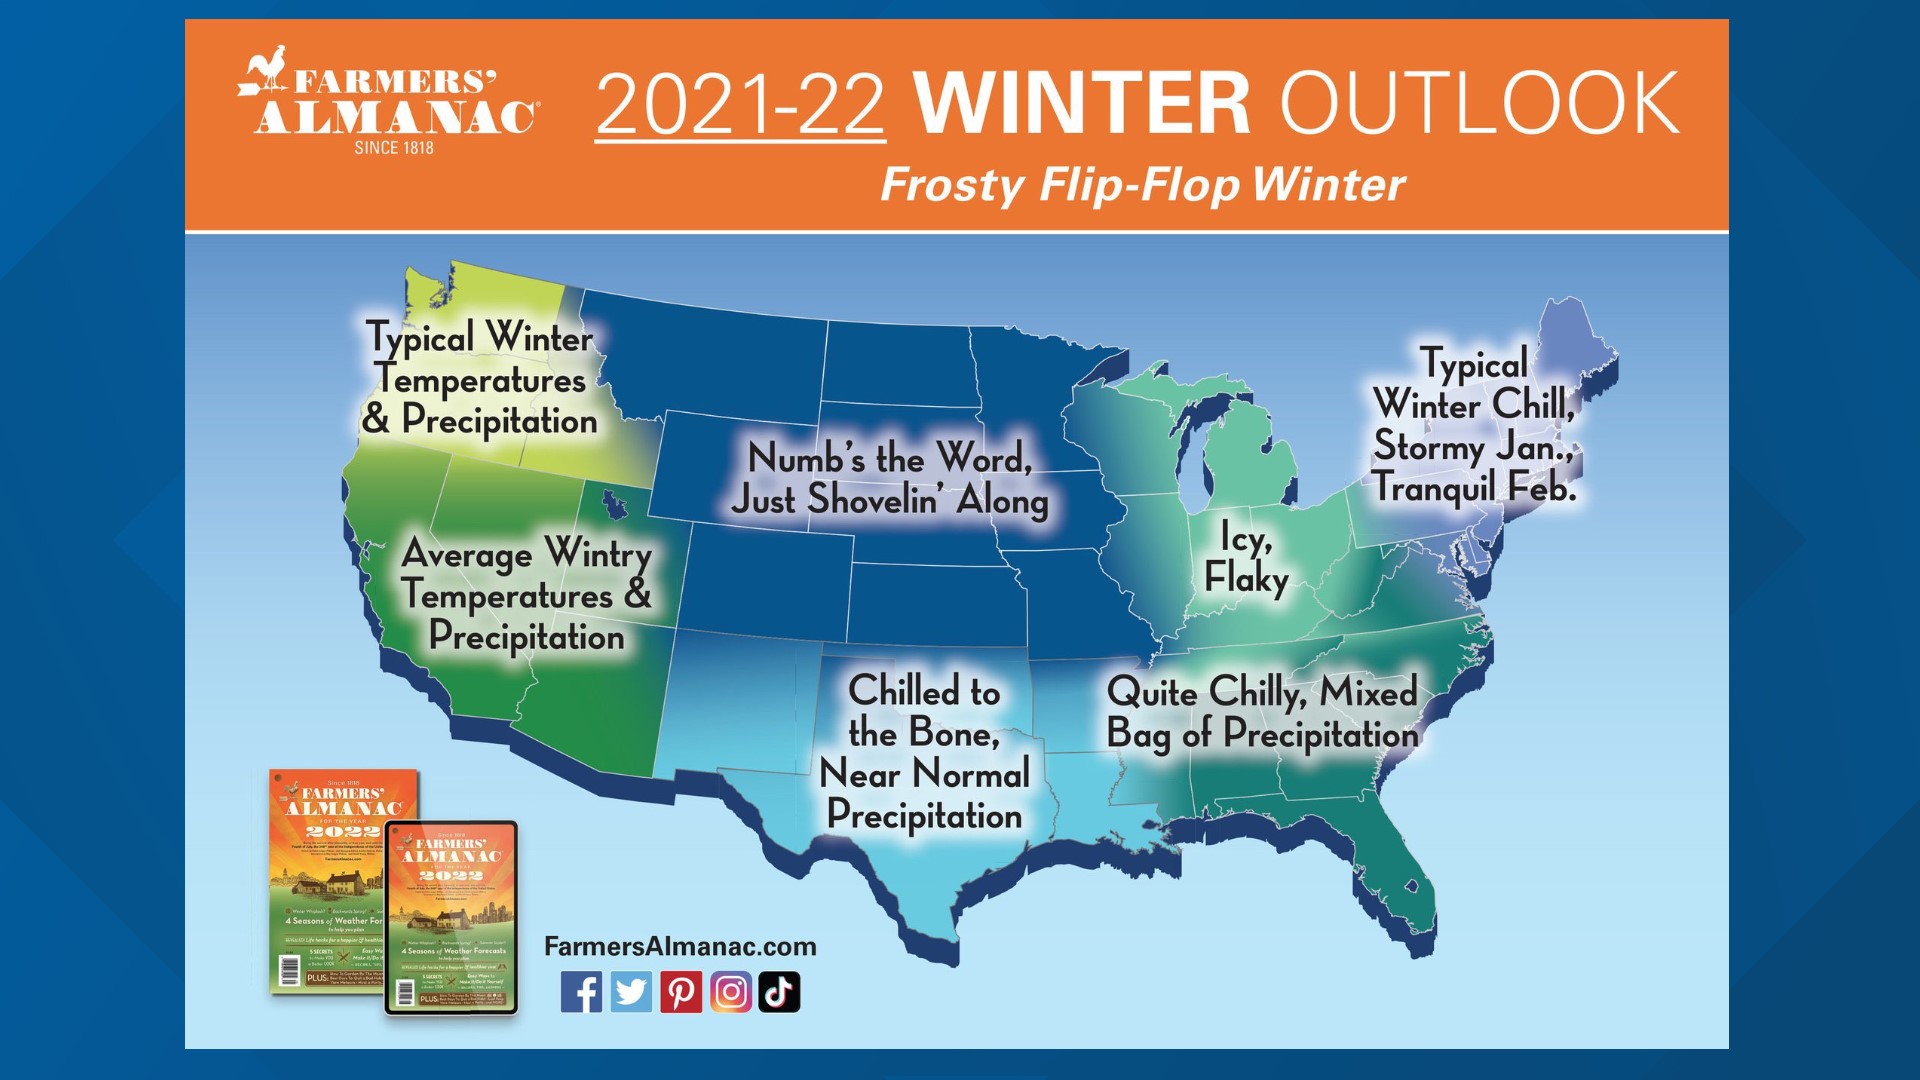 Old man winter is months away, but the Farmer's Almanac already has their take on what it may hold.